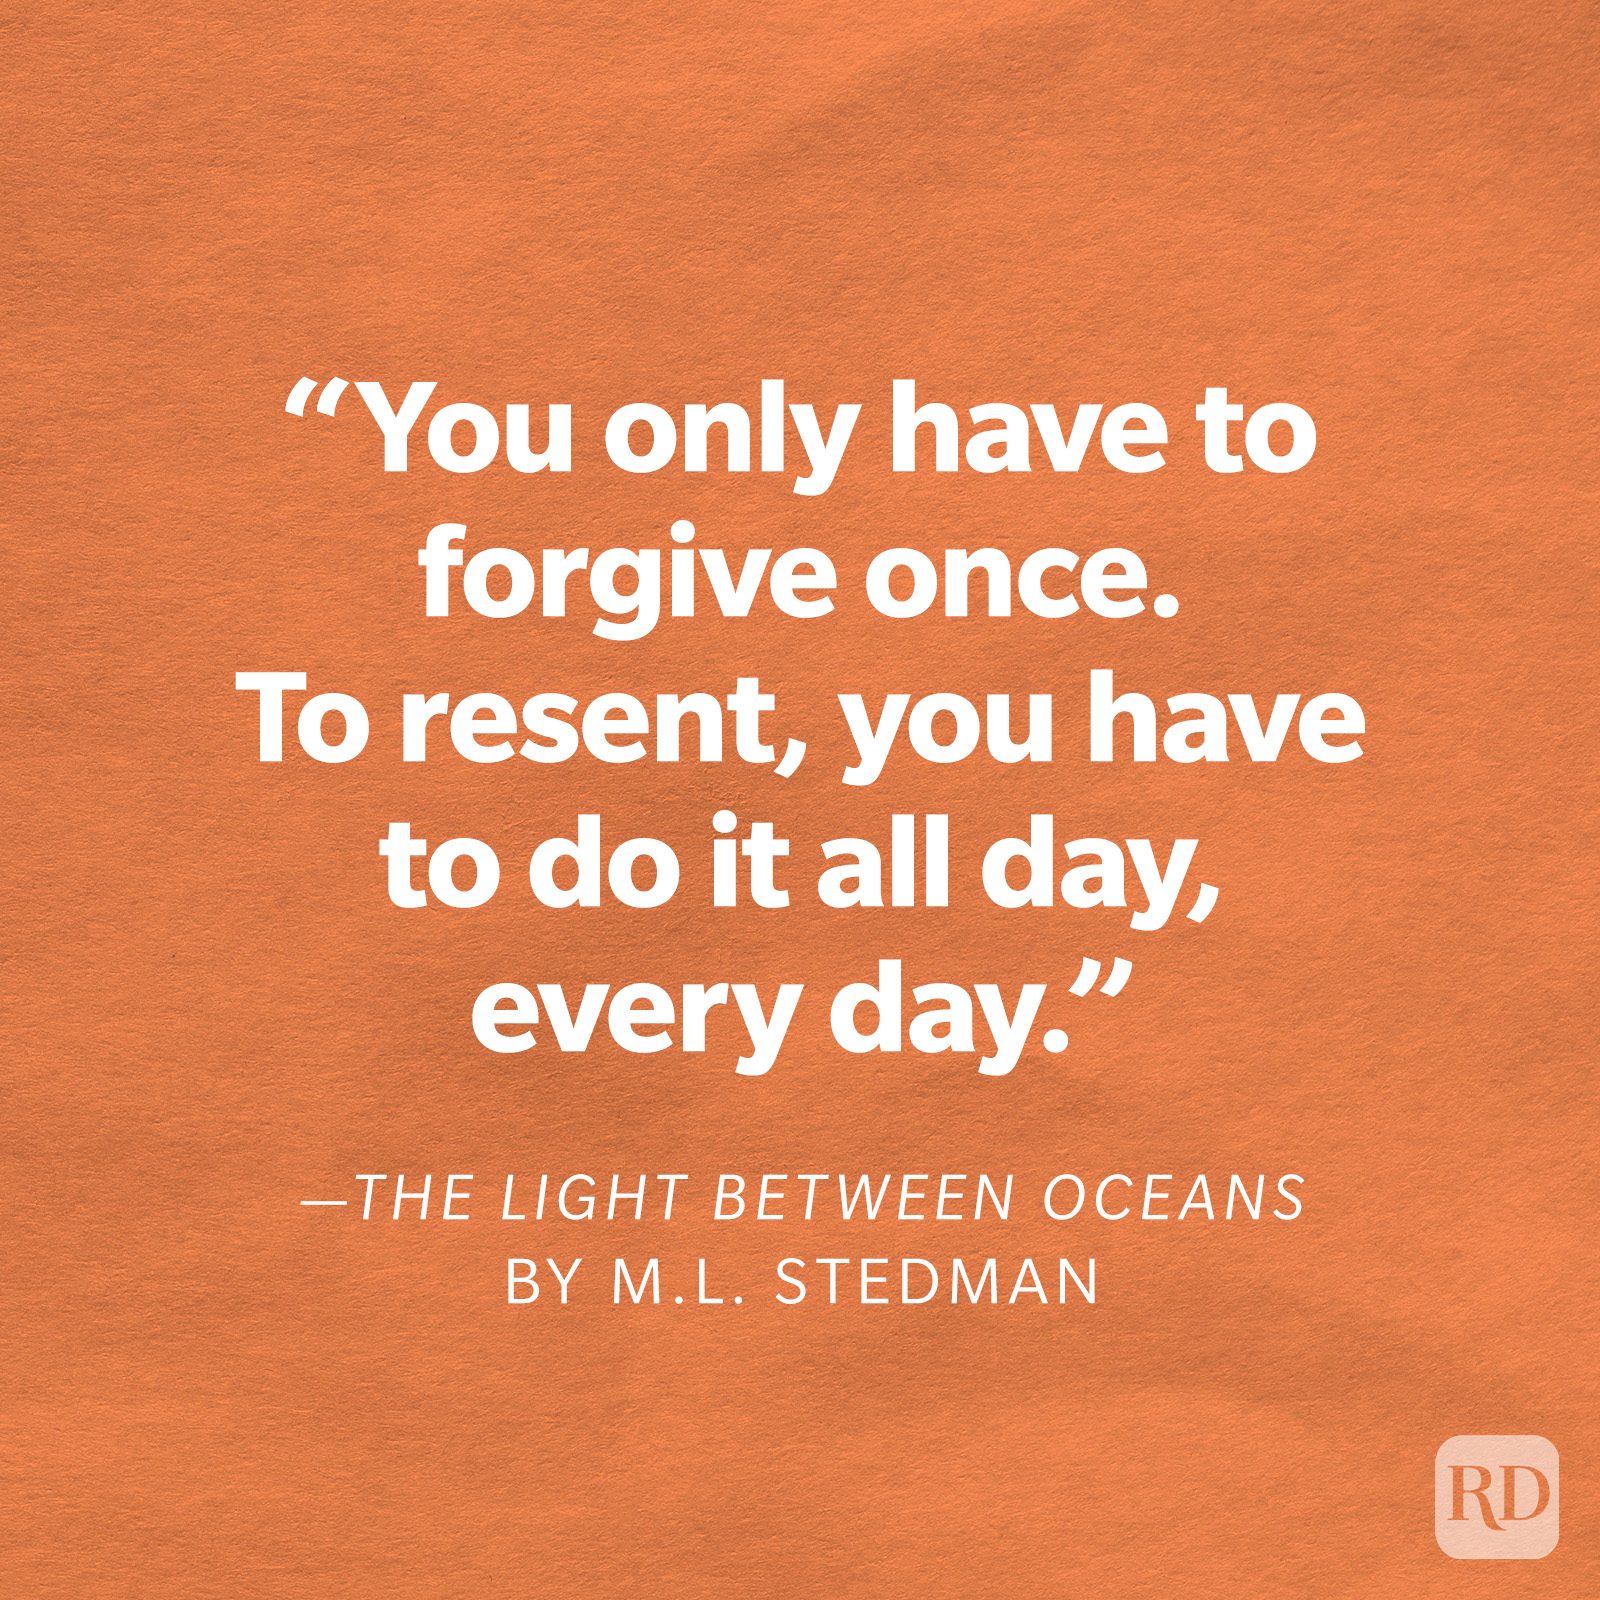 The Light Between Oceans by M.L. Stedman "You only have to forgive once. To resent, you have to do it all day, every day."